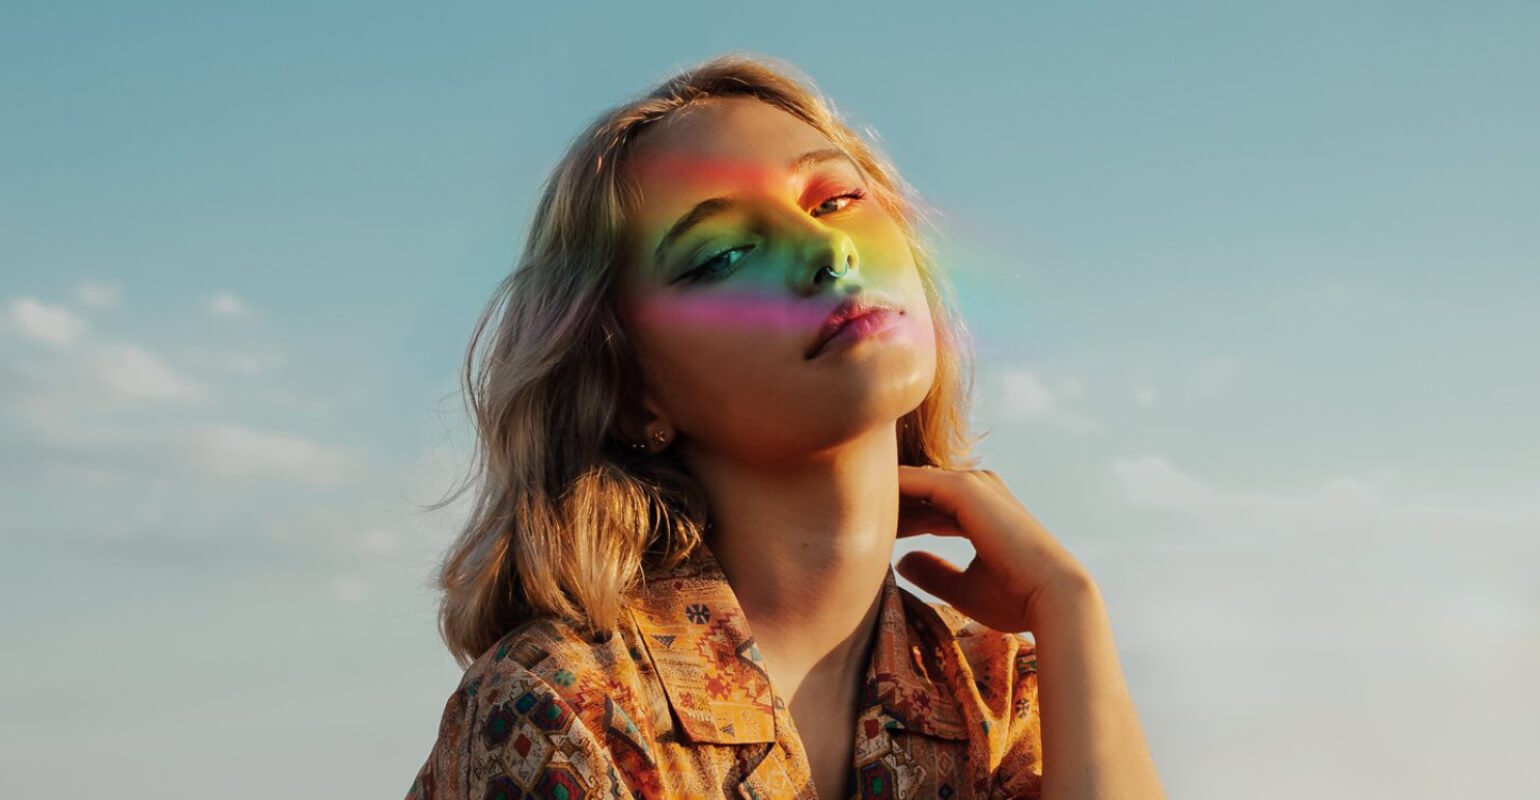 A girl with short hair in a floral shirt with a rainbow filter on her face